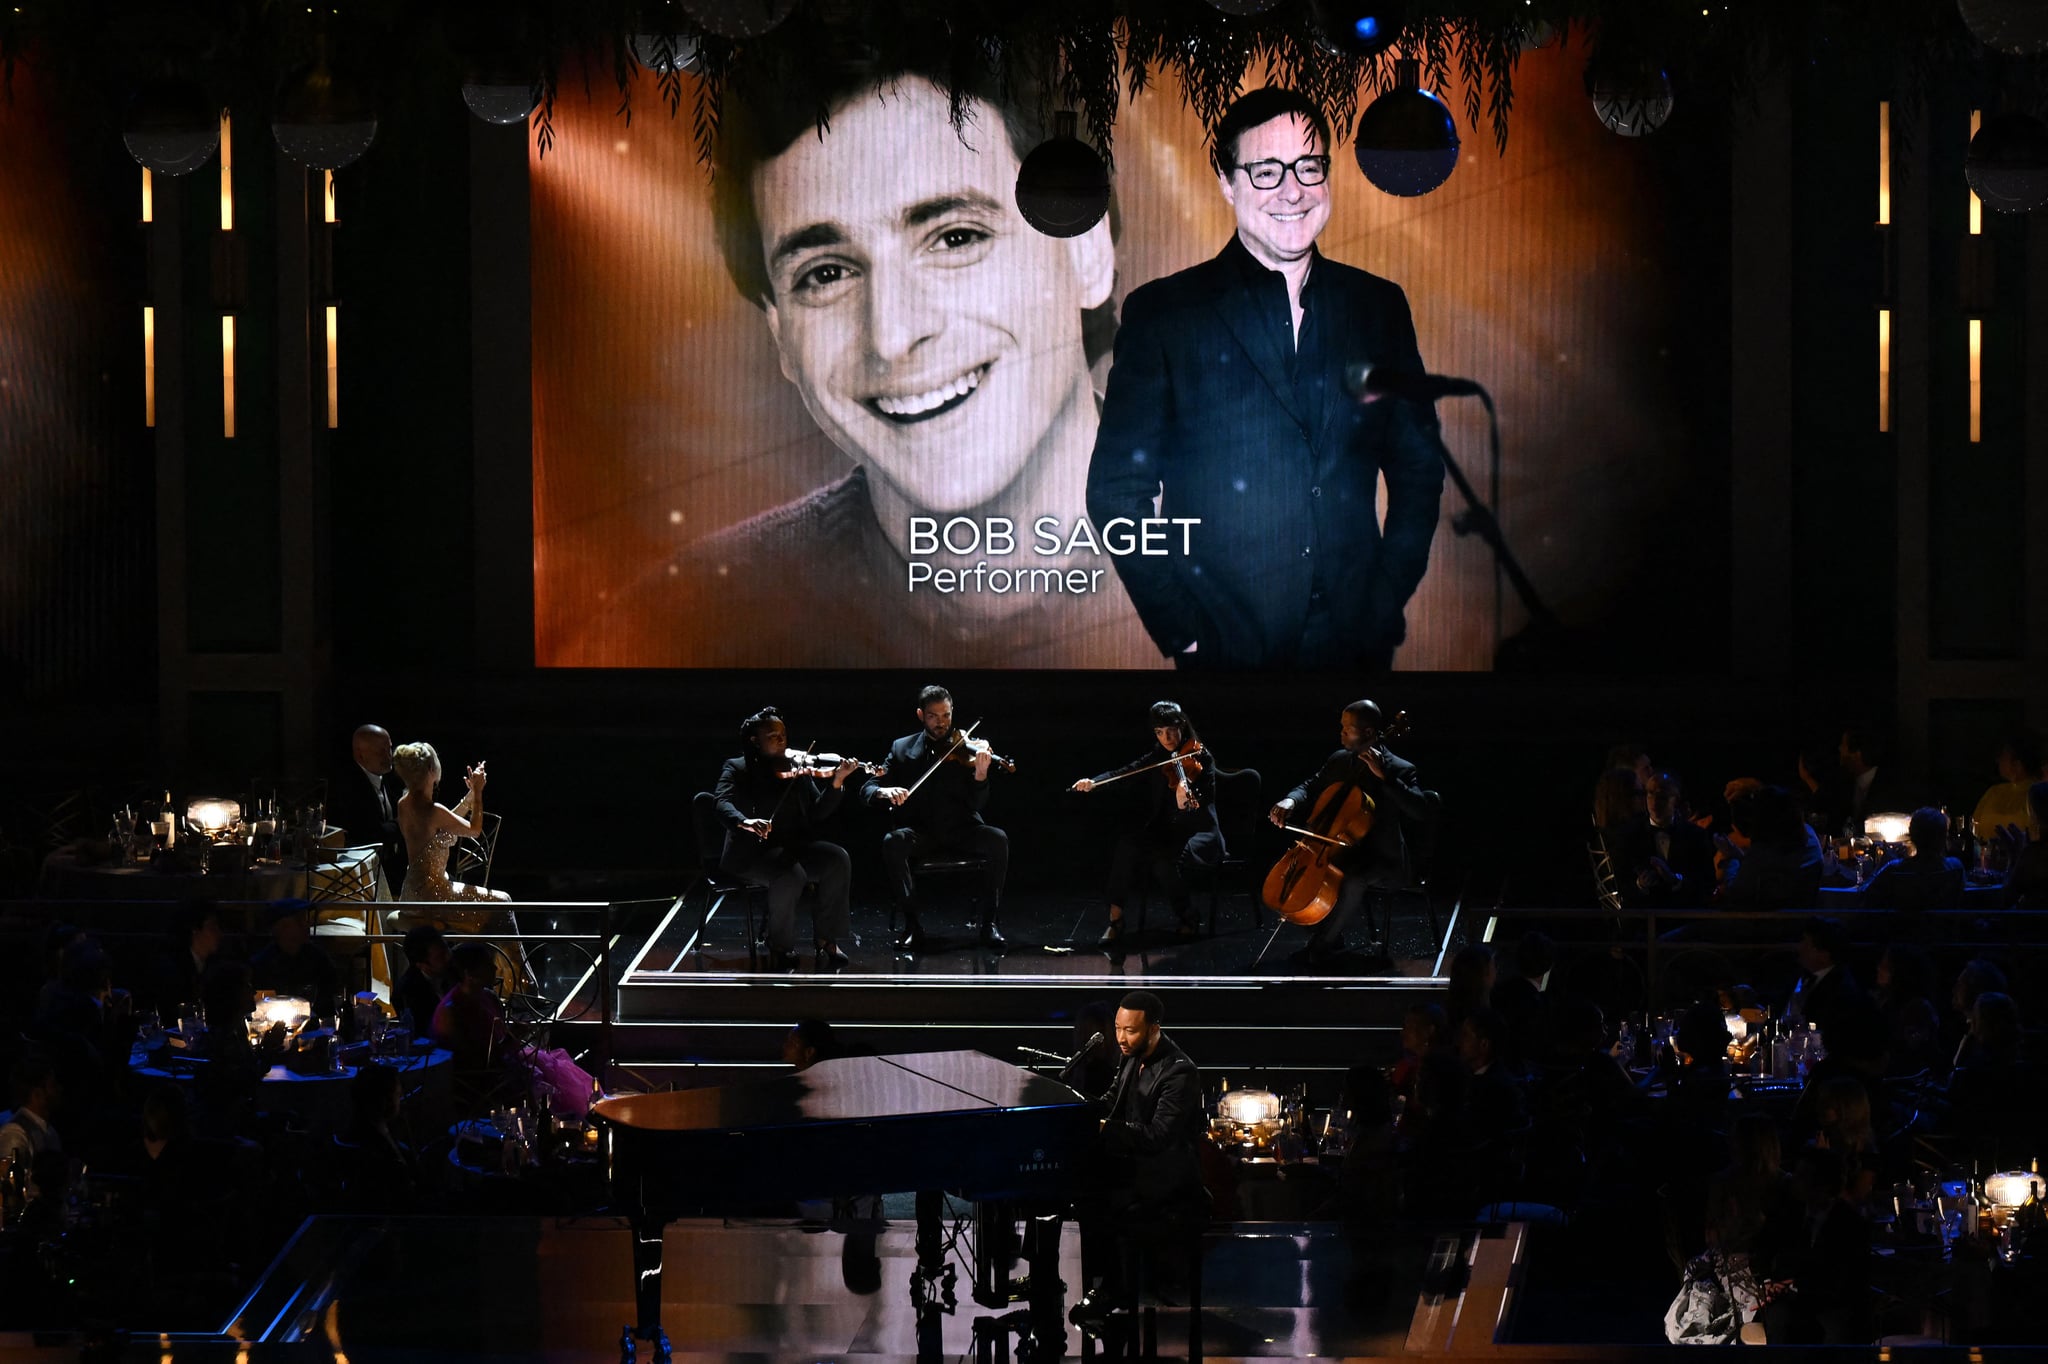 Late US actor Bob Saget is seen onscreen during an In Memoriam segment performed by US singer-songwriter John Legend onstage during the 74th Emmy Awards at the Microsoft Theater in Los Angeles, California, on September 12, 2022. (Photo by Patrick T. FALLON / AFP) (Photo by PATRICK T. FALLON/AFP via Getty Images)